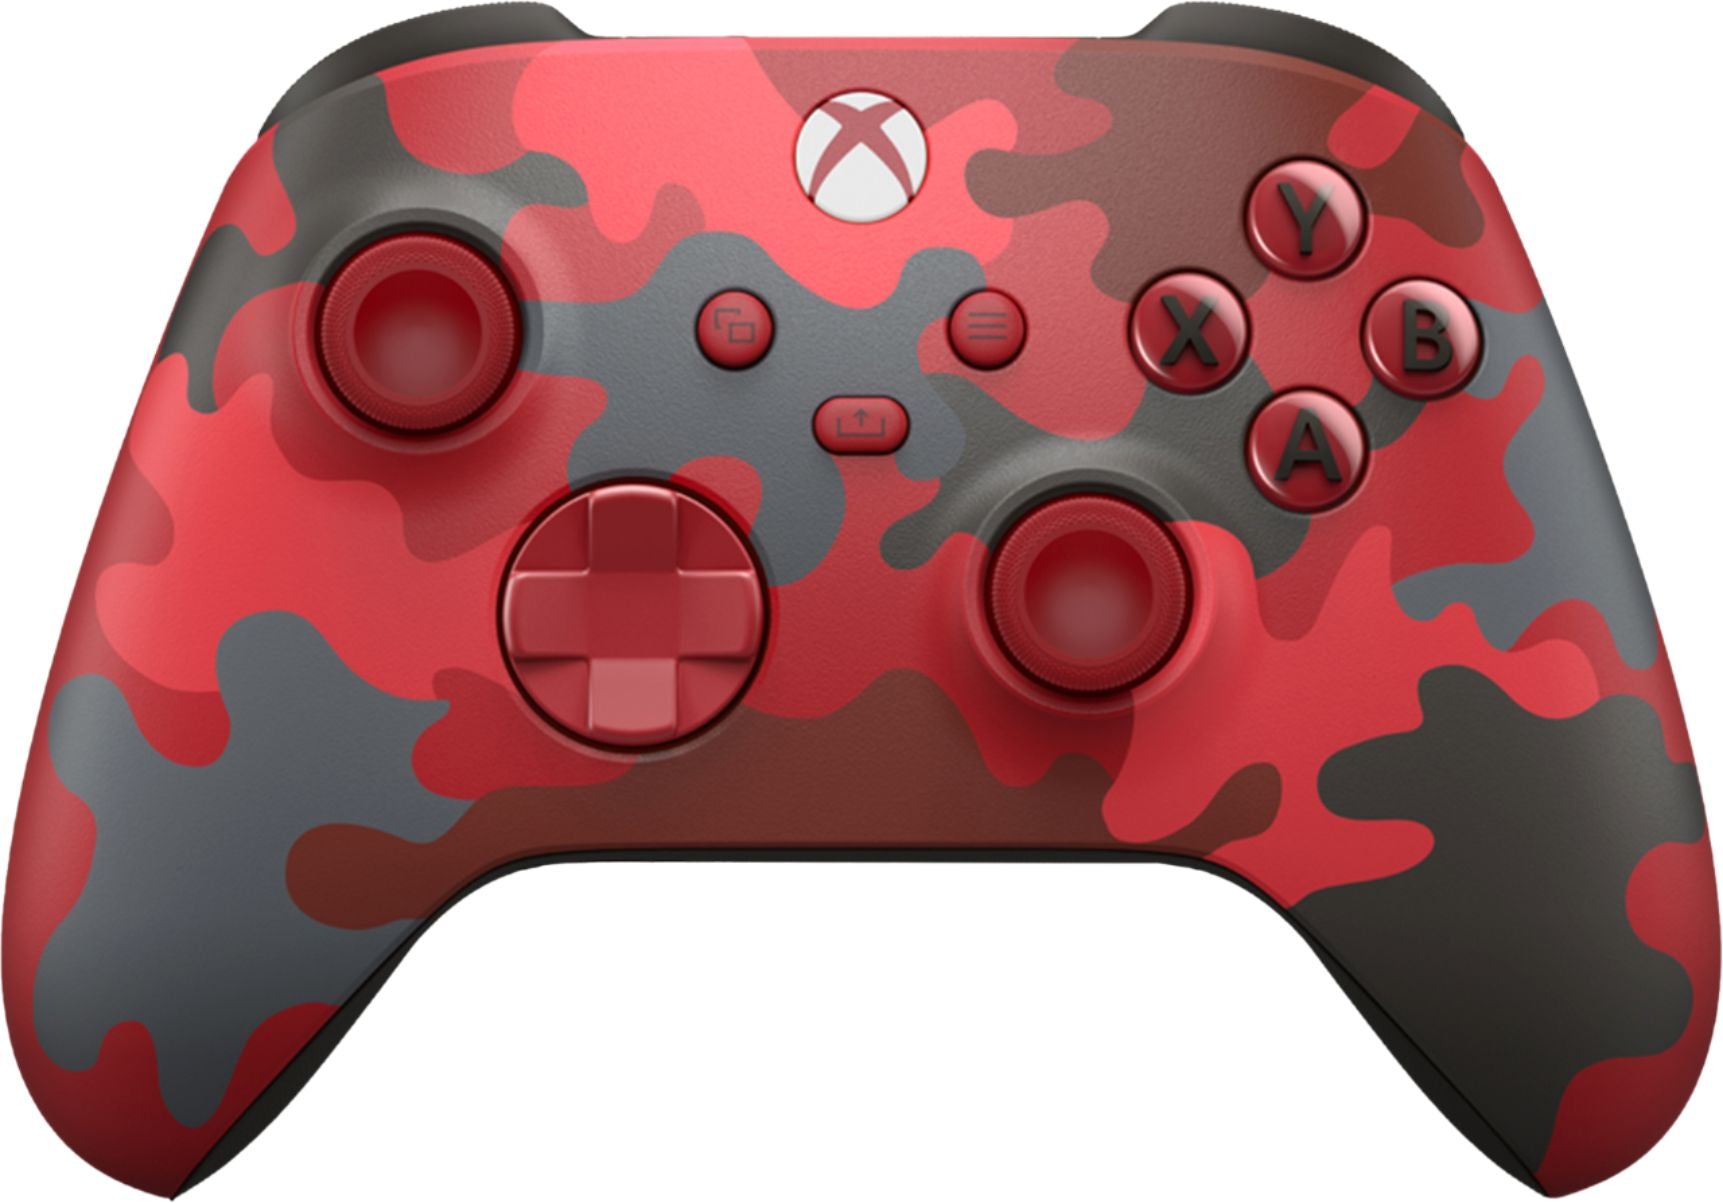 Microsoft - QAU-00016 Controller for Xbox Series X, Xbox Series S, and Xbox One (Latest Model) - Daystrike Camo Special Edition